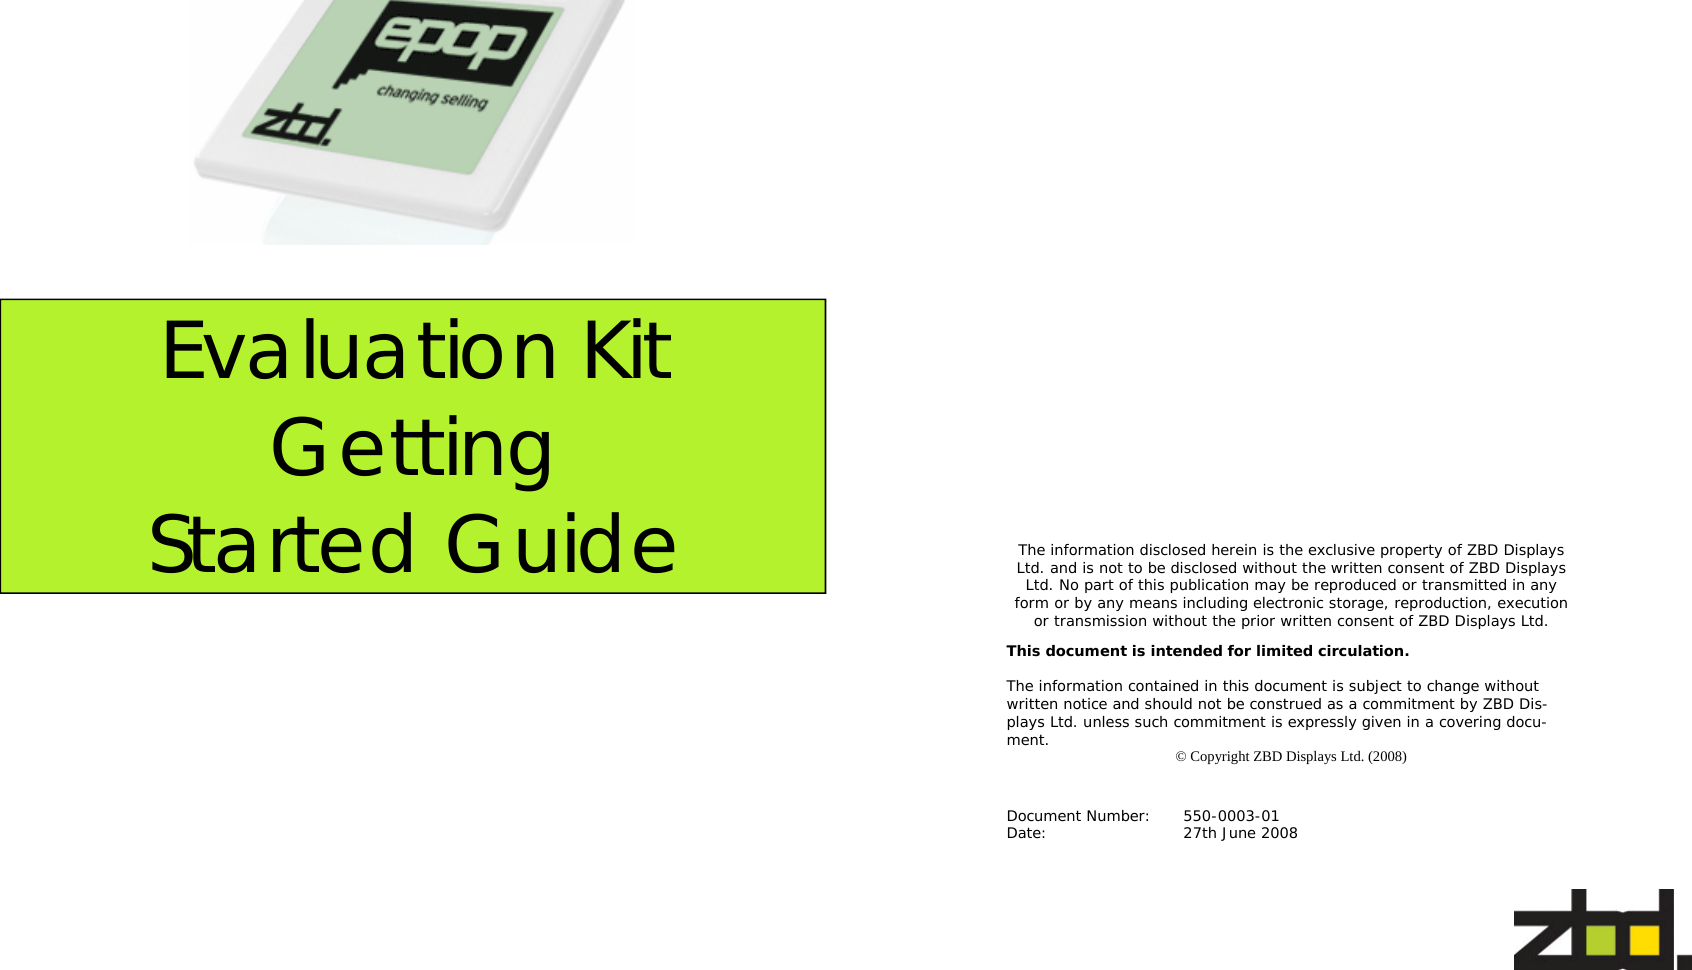   Evaluation Kit Getting Started Guide   The information disclosed herein is the exclusive property of ZBD Displays Ltd. and is not to be disclosed without the written consent of ZBD Displays Ltd. No part of this publication may be reproduced or transmitted in any form or by any means including electronic storage, reproduction, execution or transmission without the prior written consent of ZBD Displays Ltd. This document is intended for limited circulation.  The information contained in this document is subject to change without written notice and should not be construed as a commitment by ZBD Dis-plays Ltd. unless such commitment is expressly given in a covering docu-ment.  © Copyright ZBD Displays Ltd. (2008) Document Number:  550-0003-01 Date:      27th June 2008 